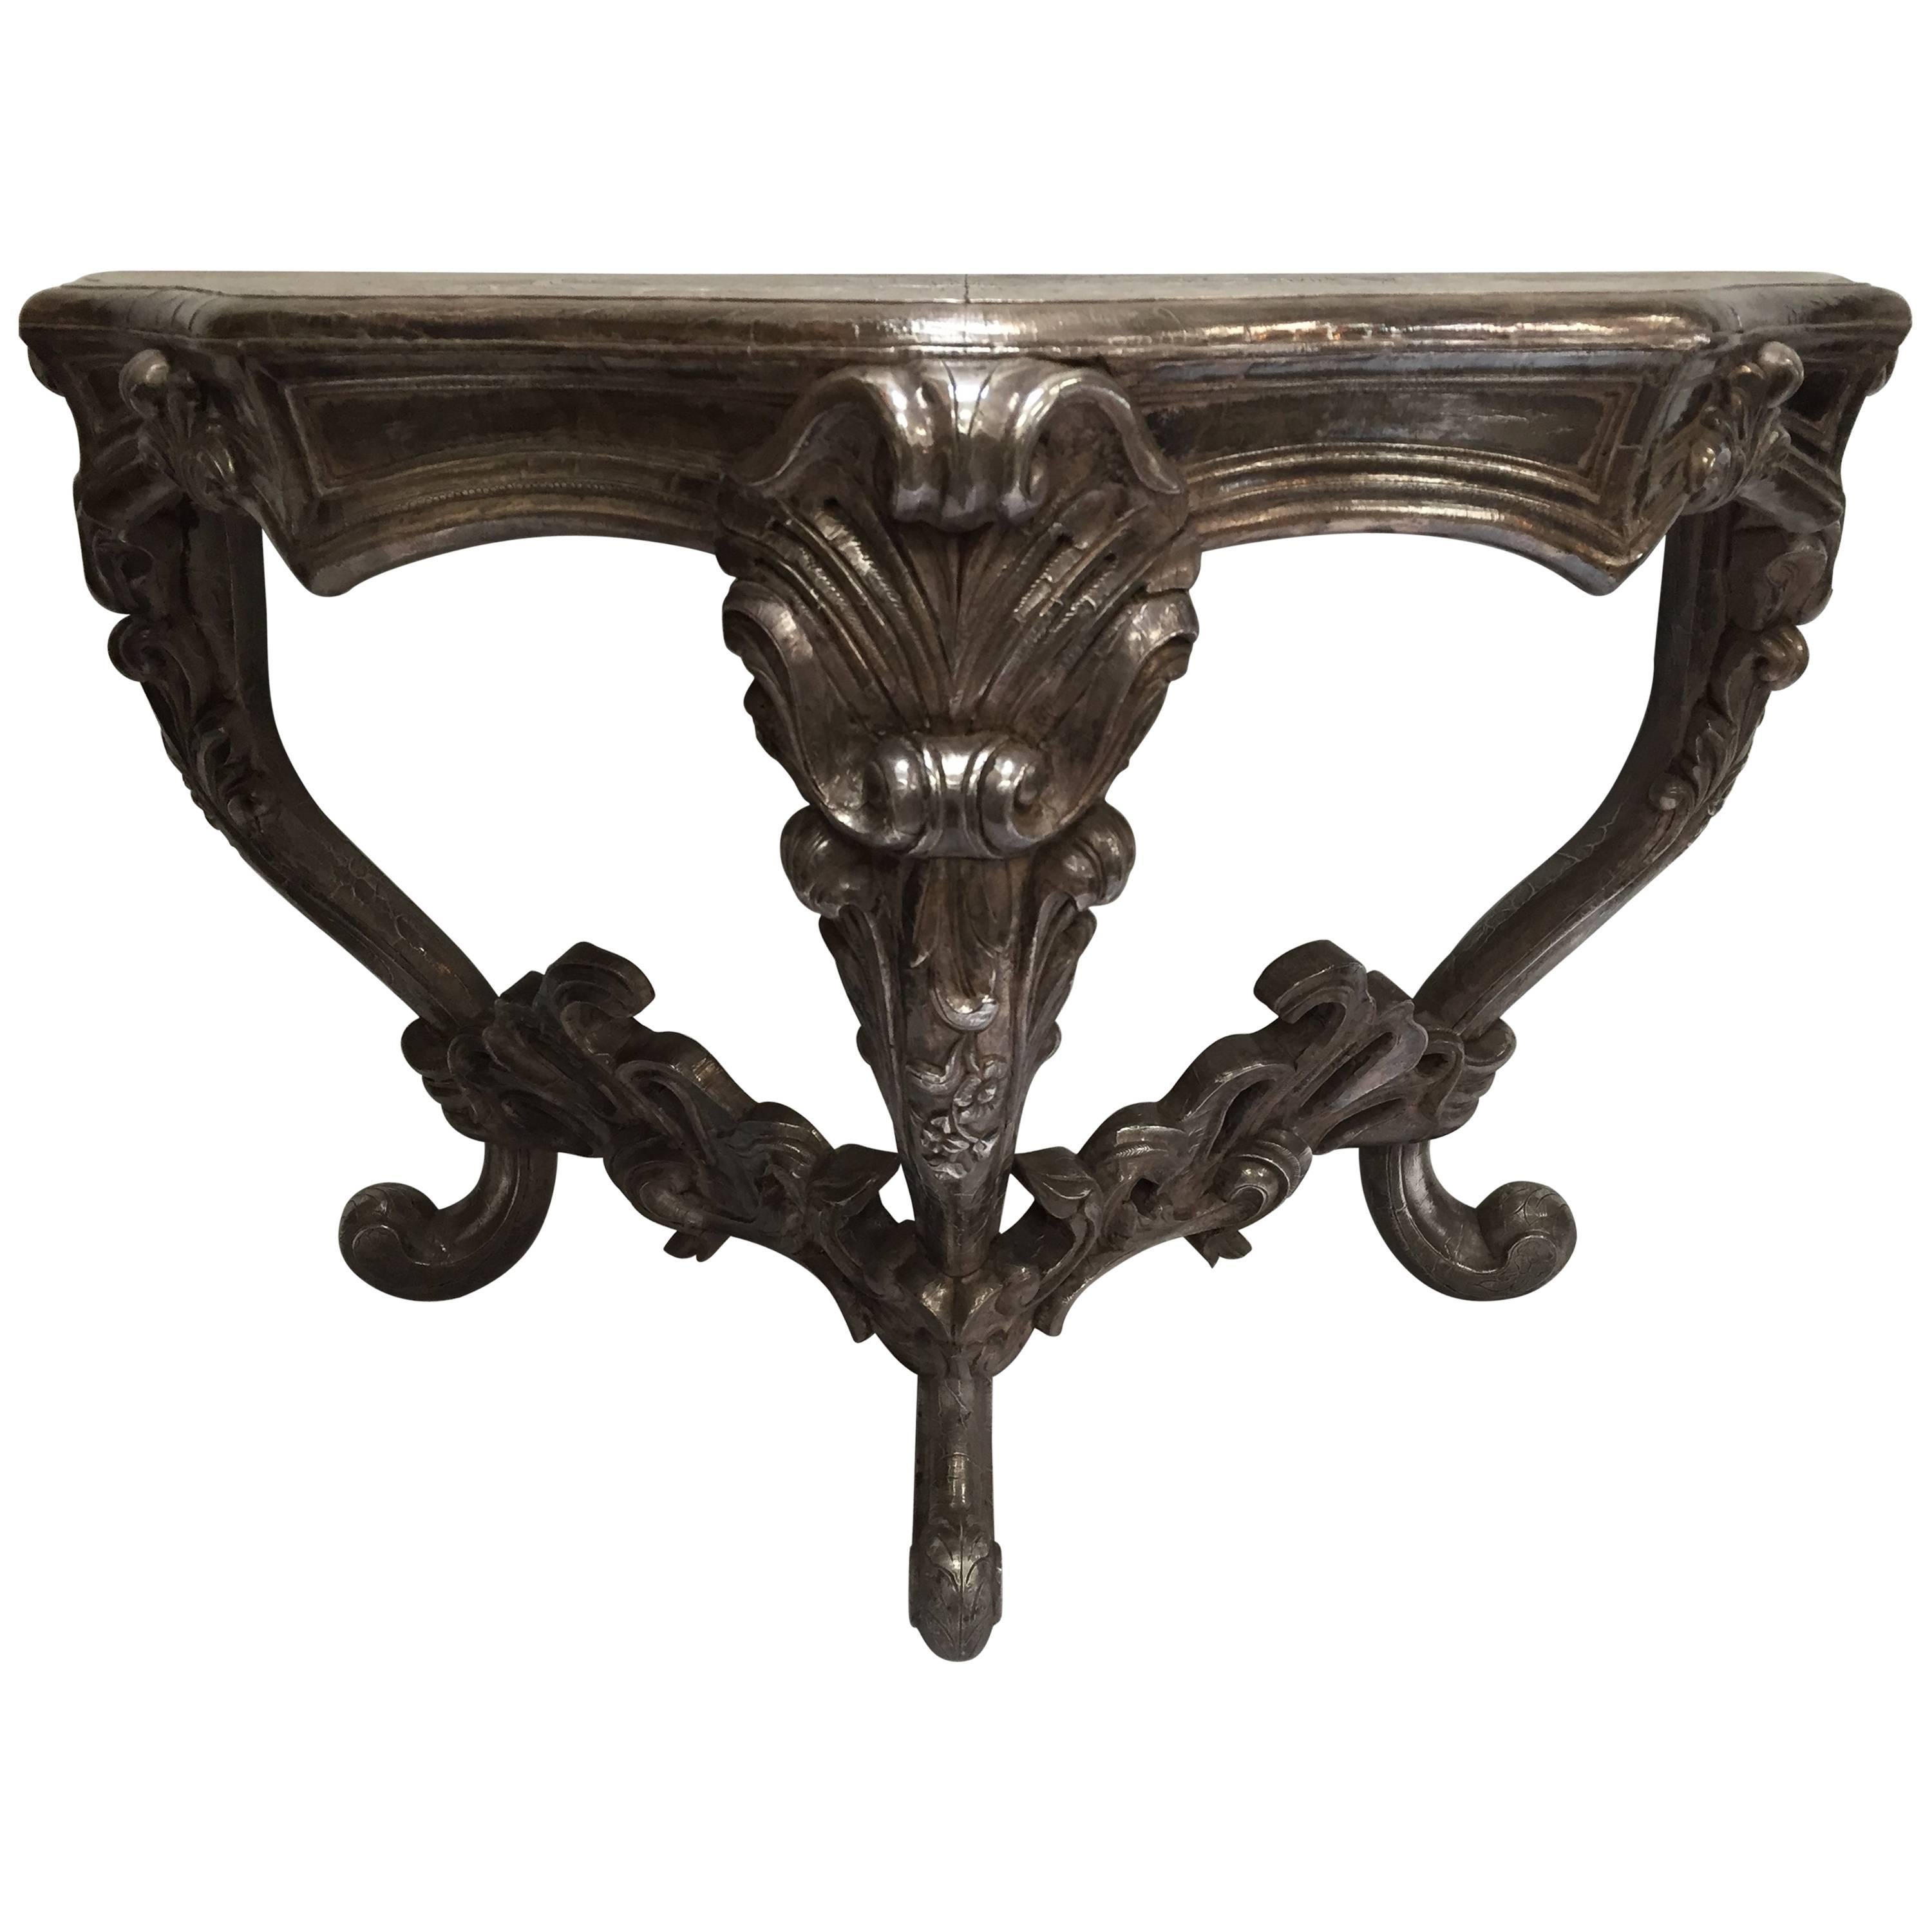 Anglo-Indian Silvered Wrapped Clad Console Table in Louis XV Style